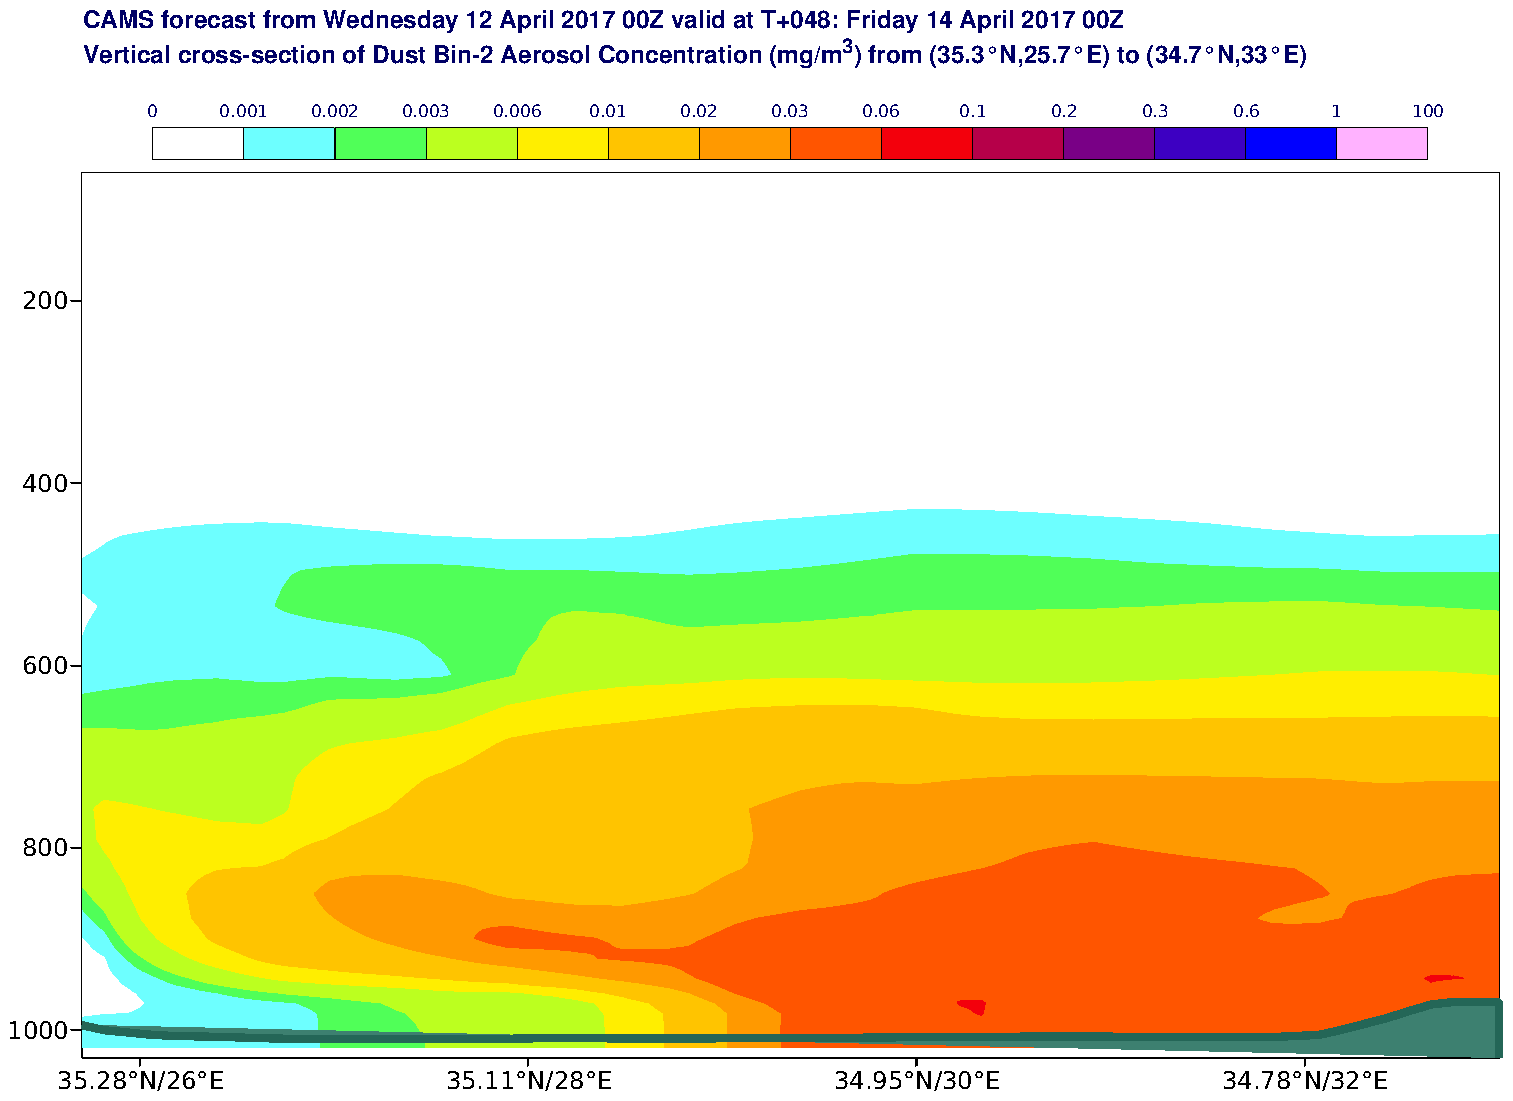 Vertical cross-section of Dust Bin-2 Aerosol Concentration (mg/m3) valid at T48 - 2017-04-14 00:00